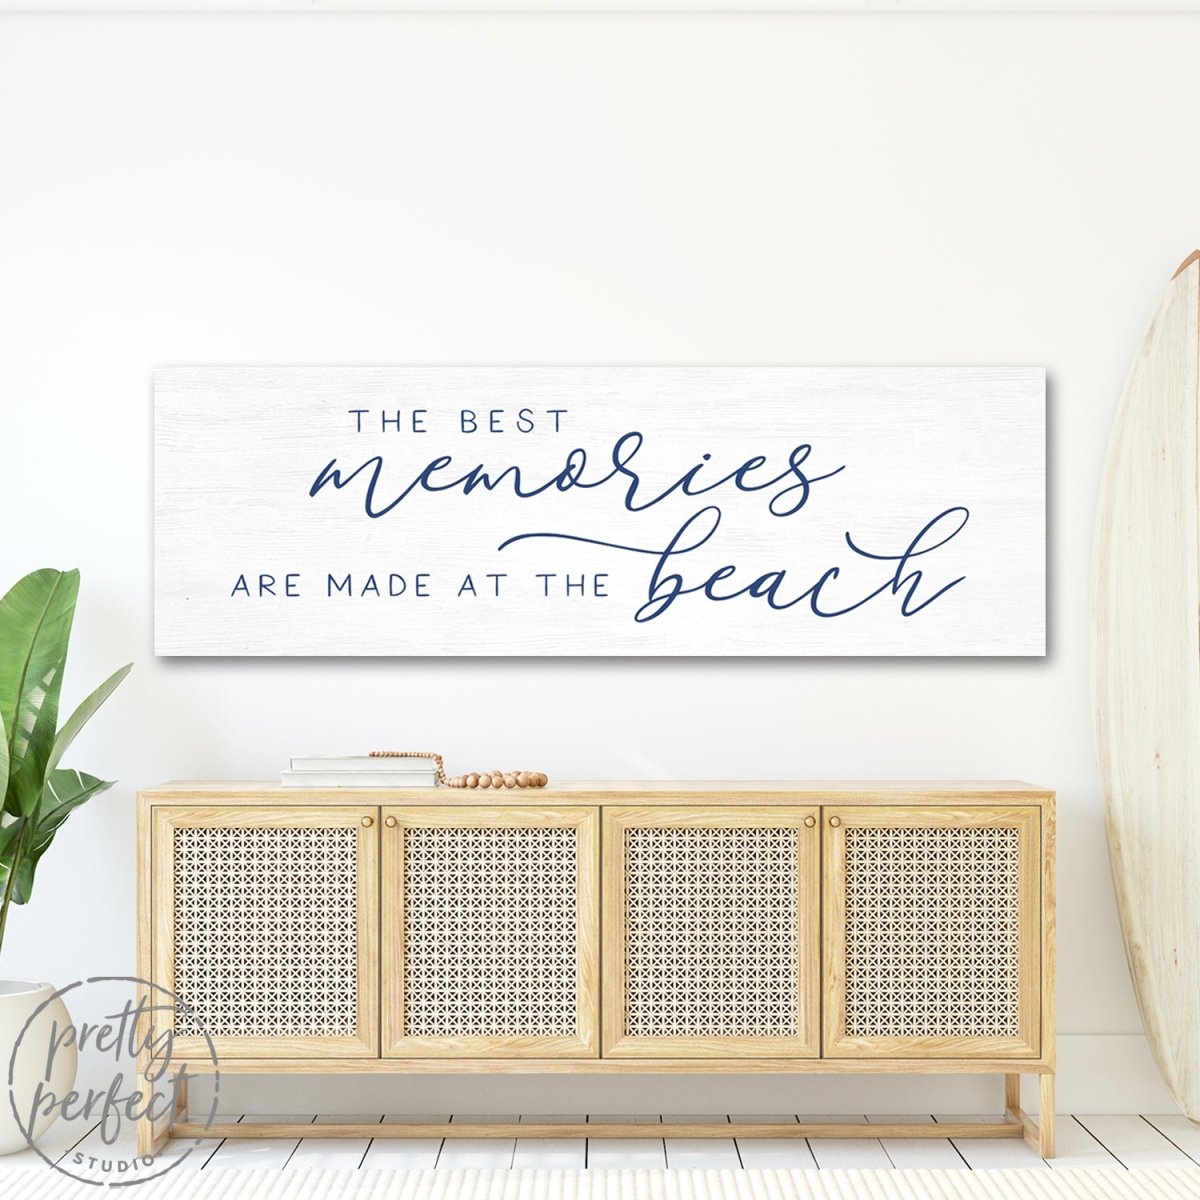 The Best Memories Are Made At The Beach Sign